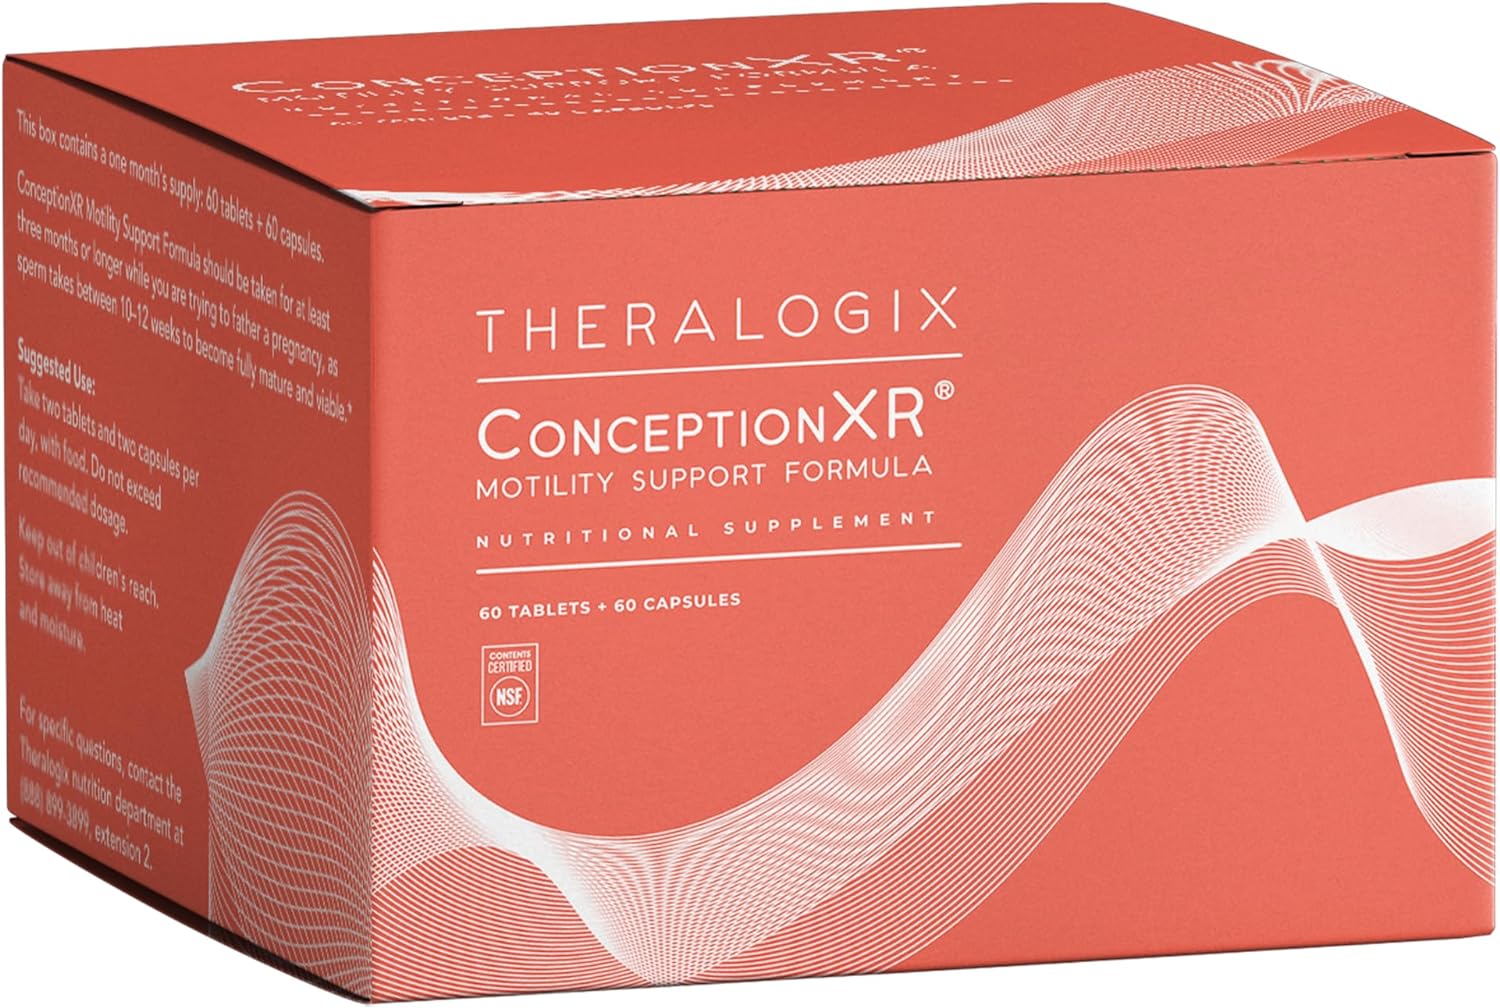 Theralogix ConceptionXR Motility Support Formula - Men's Preconception Vitamins for Fertility Support - Male Fertility Supplements for Sperm Health* - NSF Certified - 60 Tabs + 60 Caps (30-Day Supply)